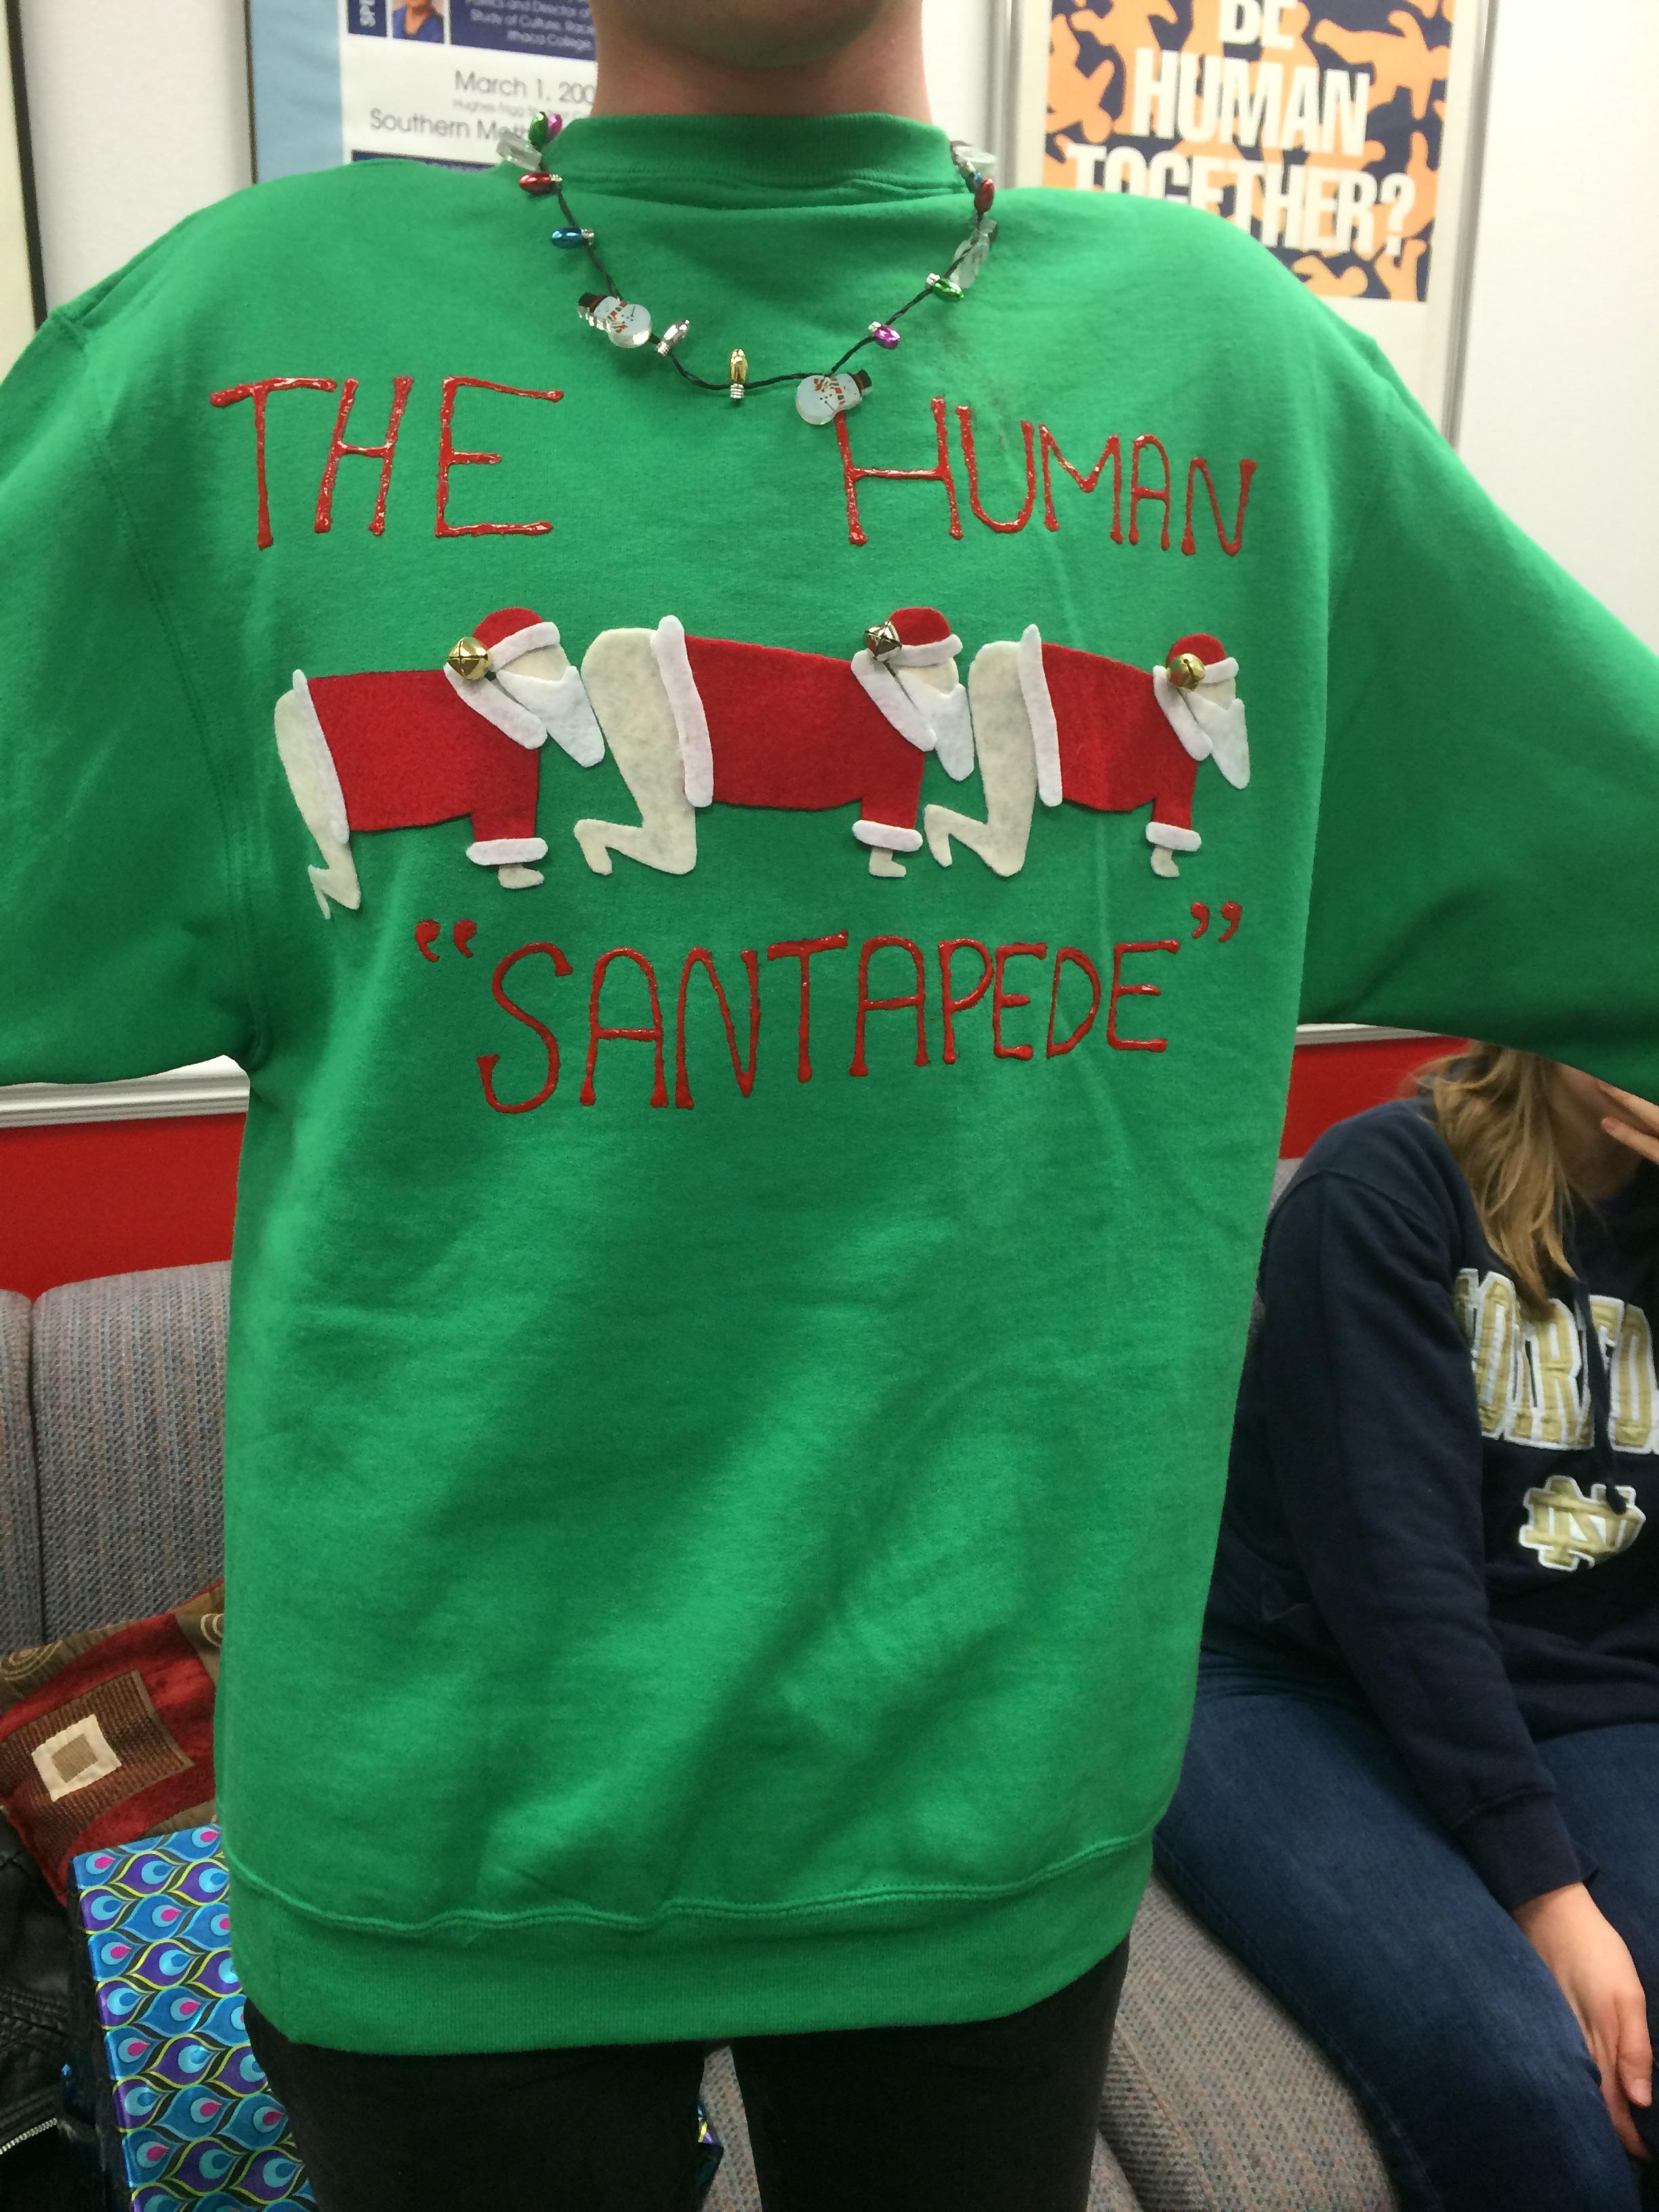 now this is a Christmas sweater